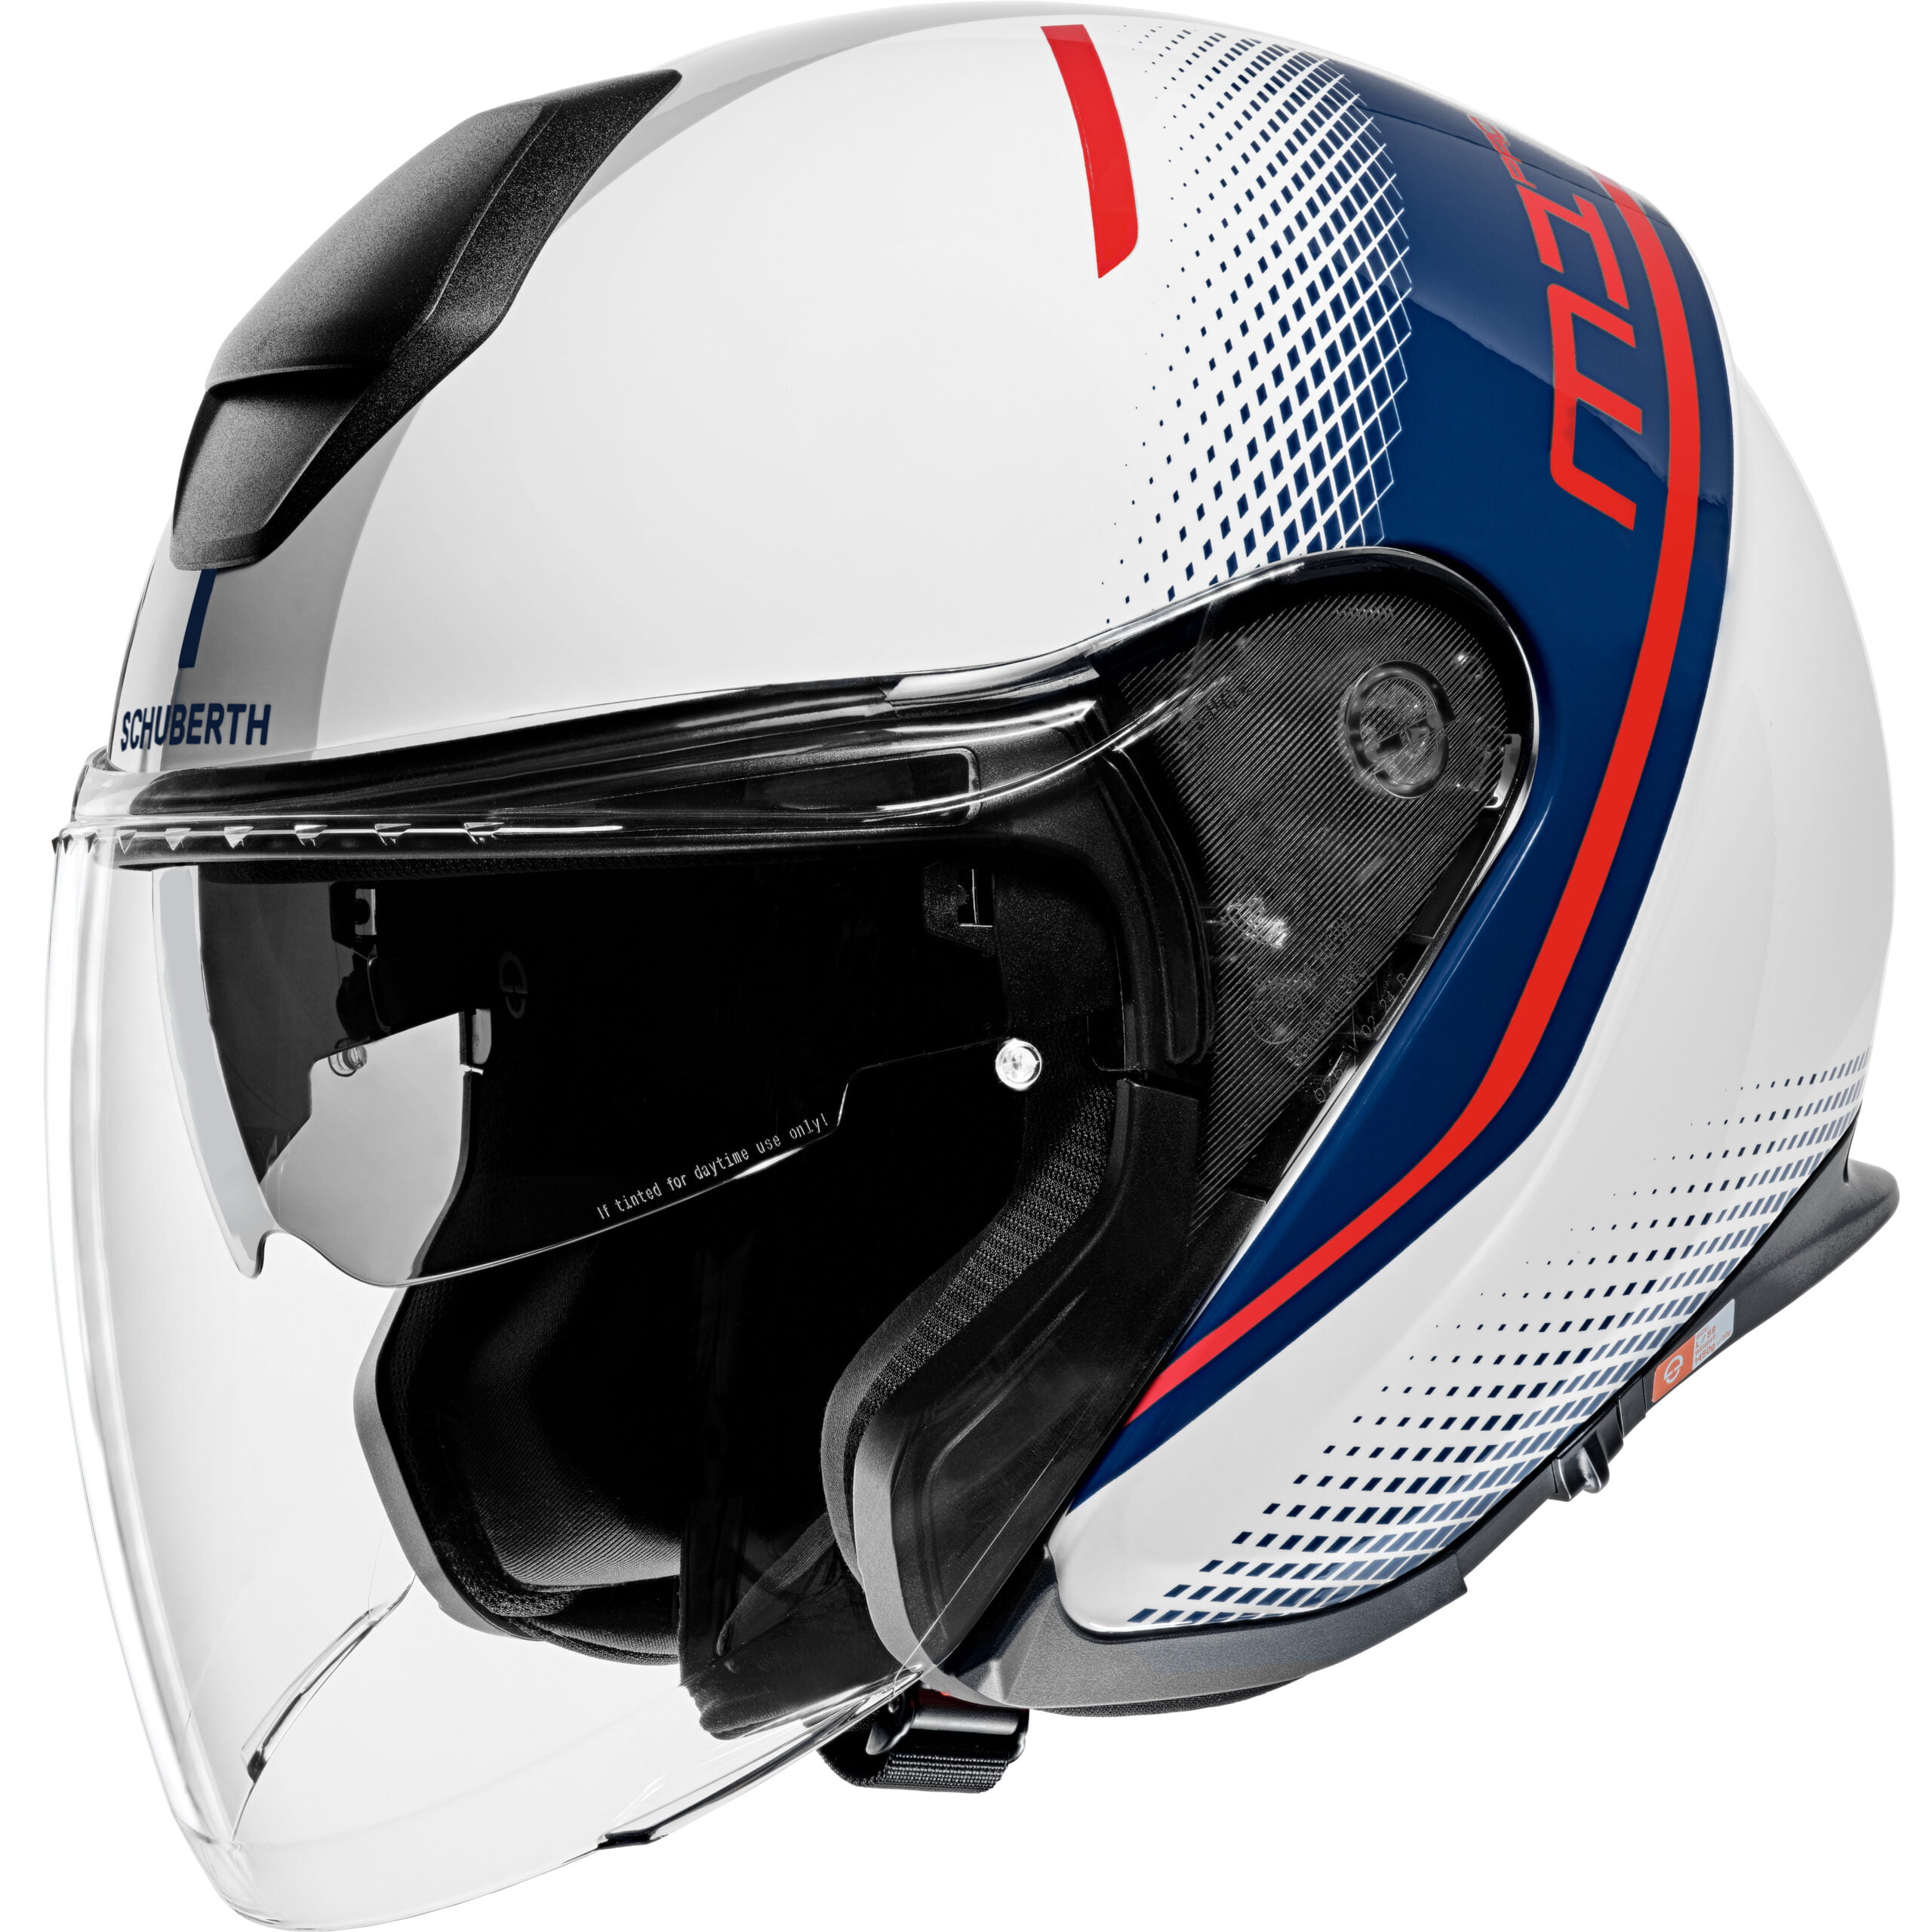 [Street] Schuberth M1 Pro 2022: Ride with passion!